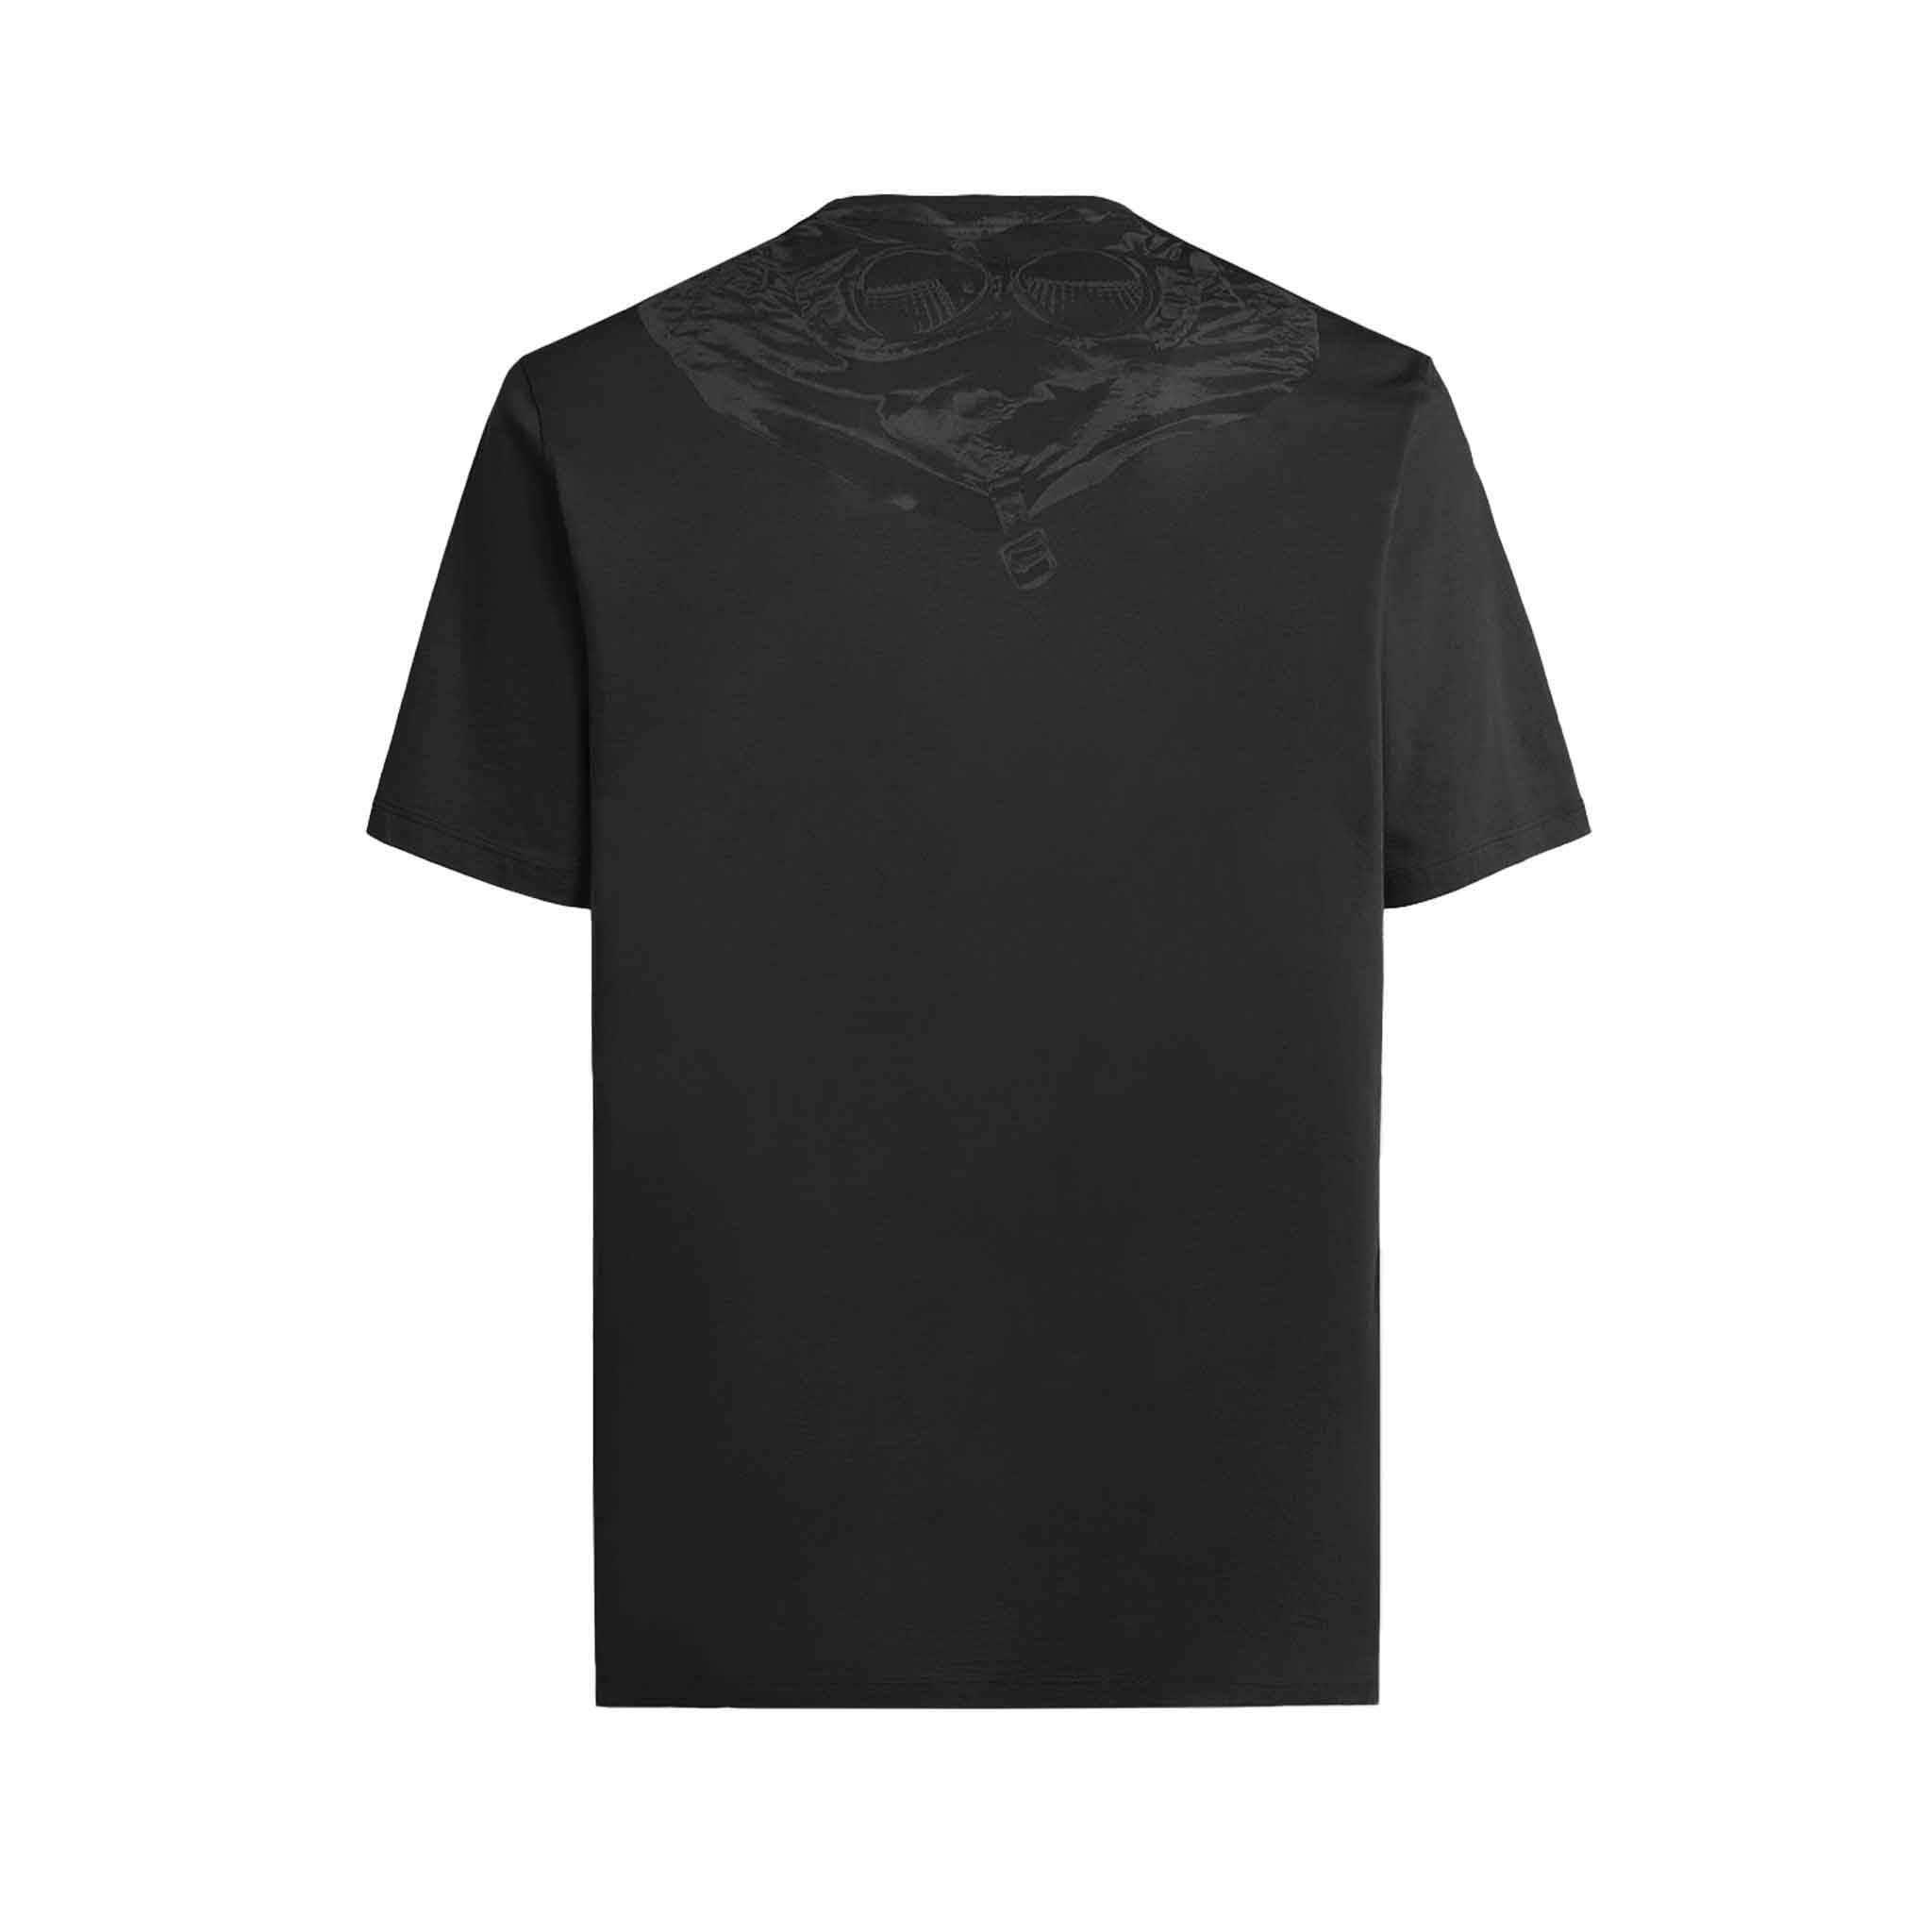 C.P. Company 30/1 Jersey Goggle T-shirt in Black